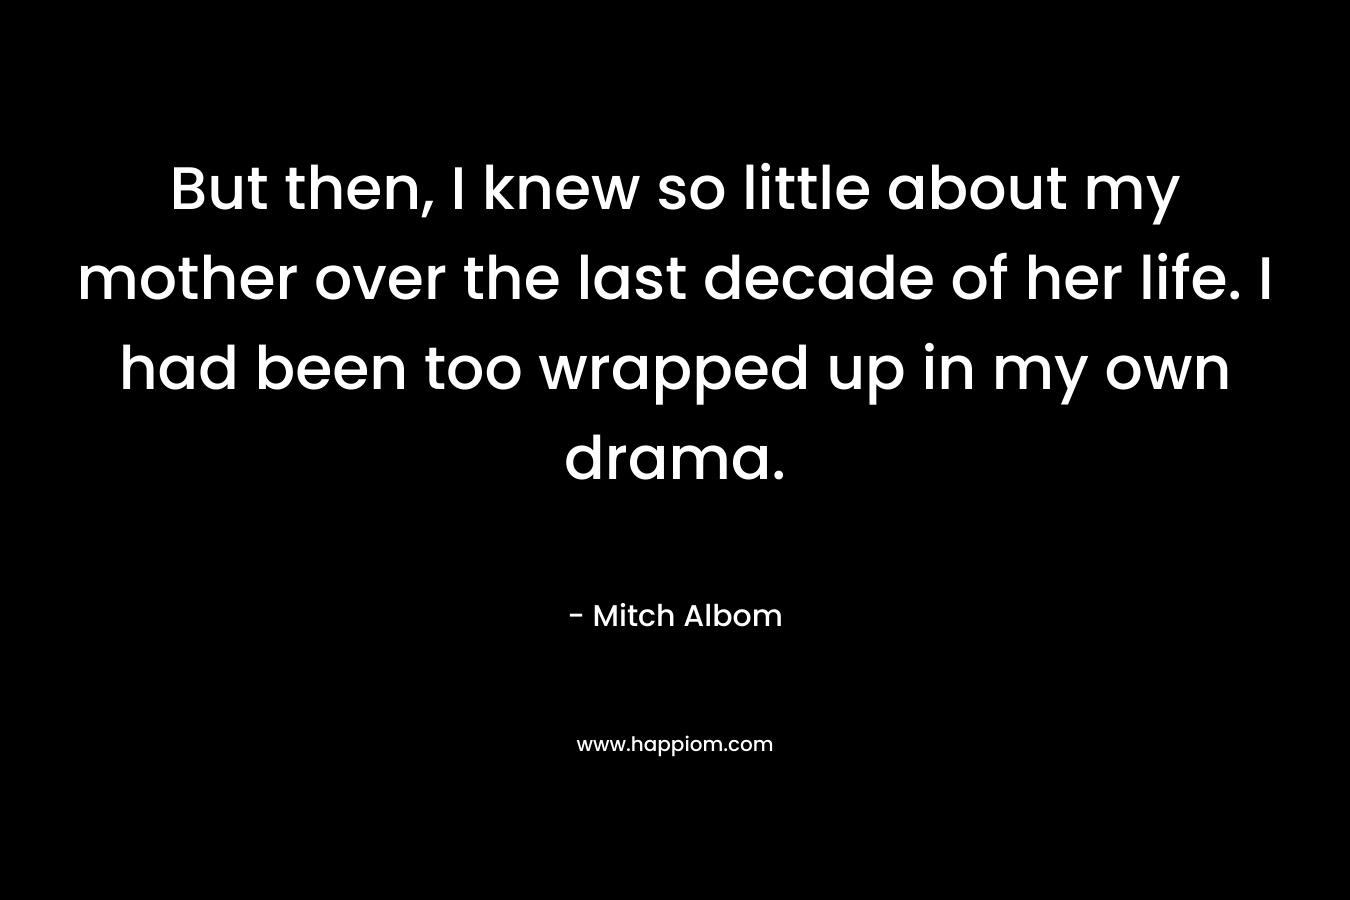 But then, I knew so little about my mother over the last decade of her life. I had been too wrapped up in my own drama. – Mitch Albom